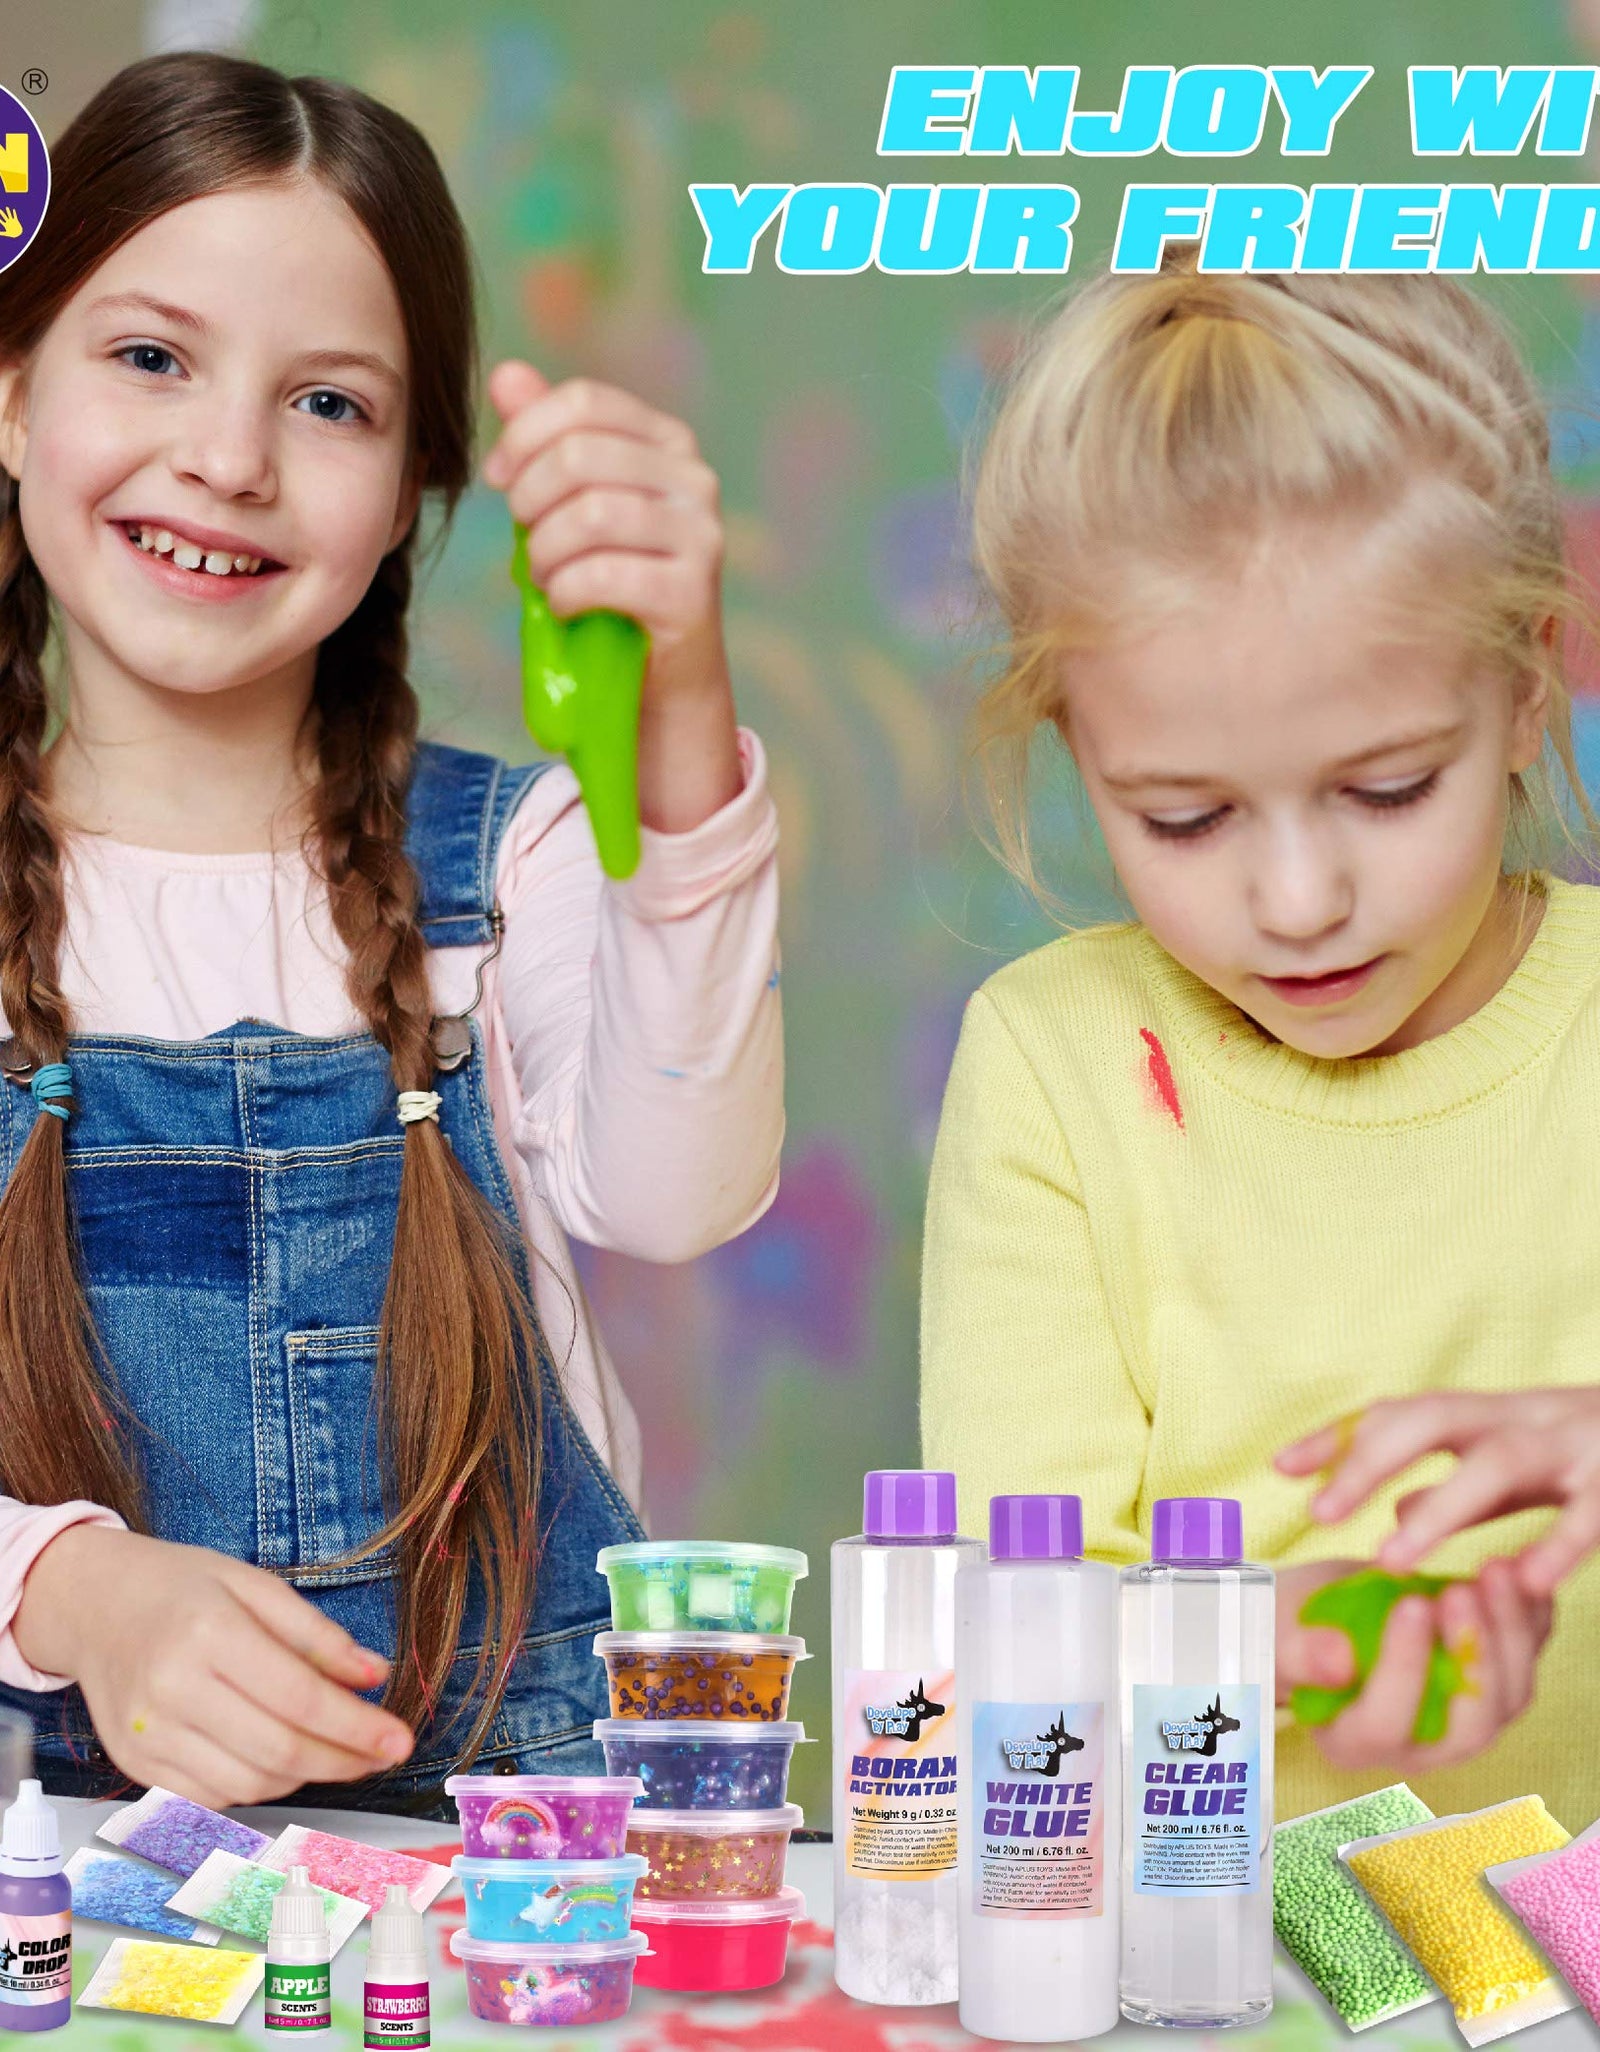 Unicorn Slime Kit for Girls, FunKidz Slime Making Kit Squish Stress Relief Toy Fluffy Cloud Foam Butter Glitter Slime with Unicorn Charms Accessories Supplies for Kids